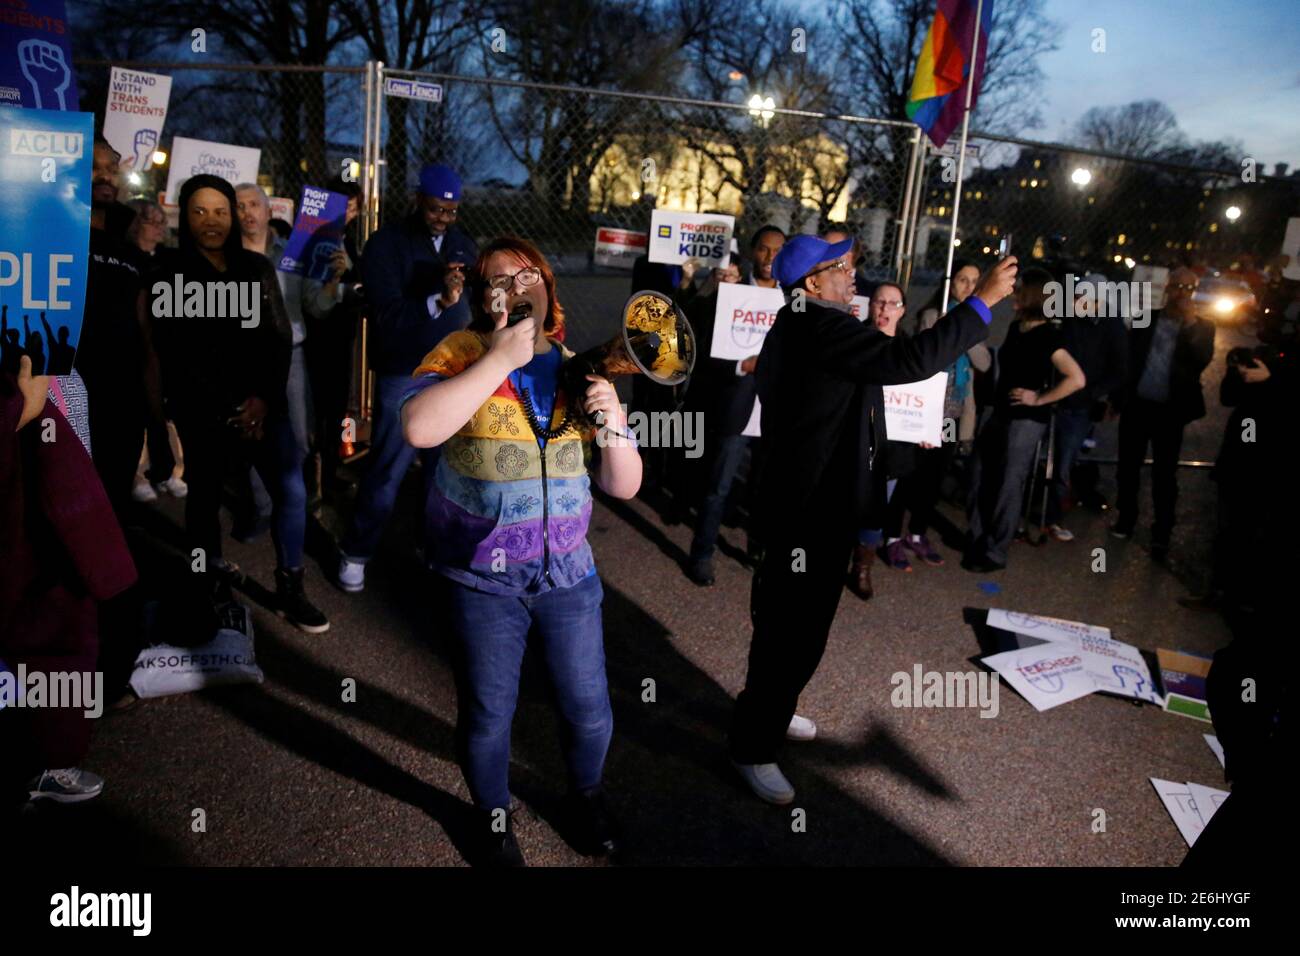 Transgender activists and supporters protest potential changes by the Trump administration in federal guidelines issued to public schools in defense of transgender student rights, near the White House in Washington, U.S. February 22, 2017. REUTERS/Jonathan Ernst Stock Photo